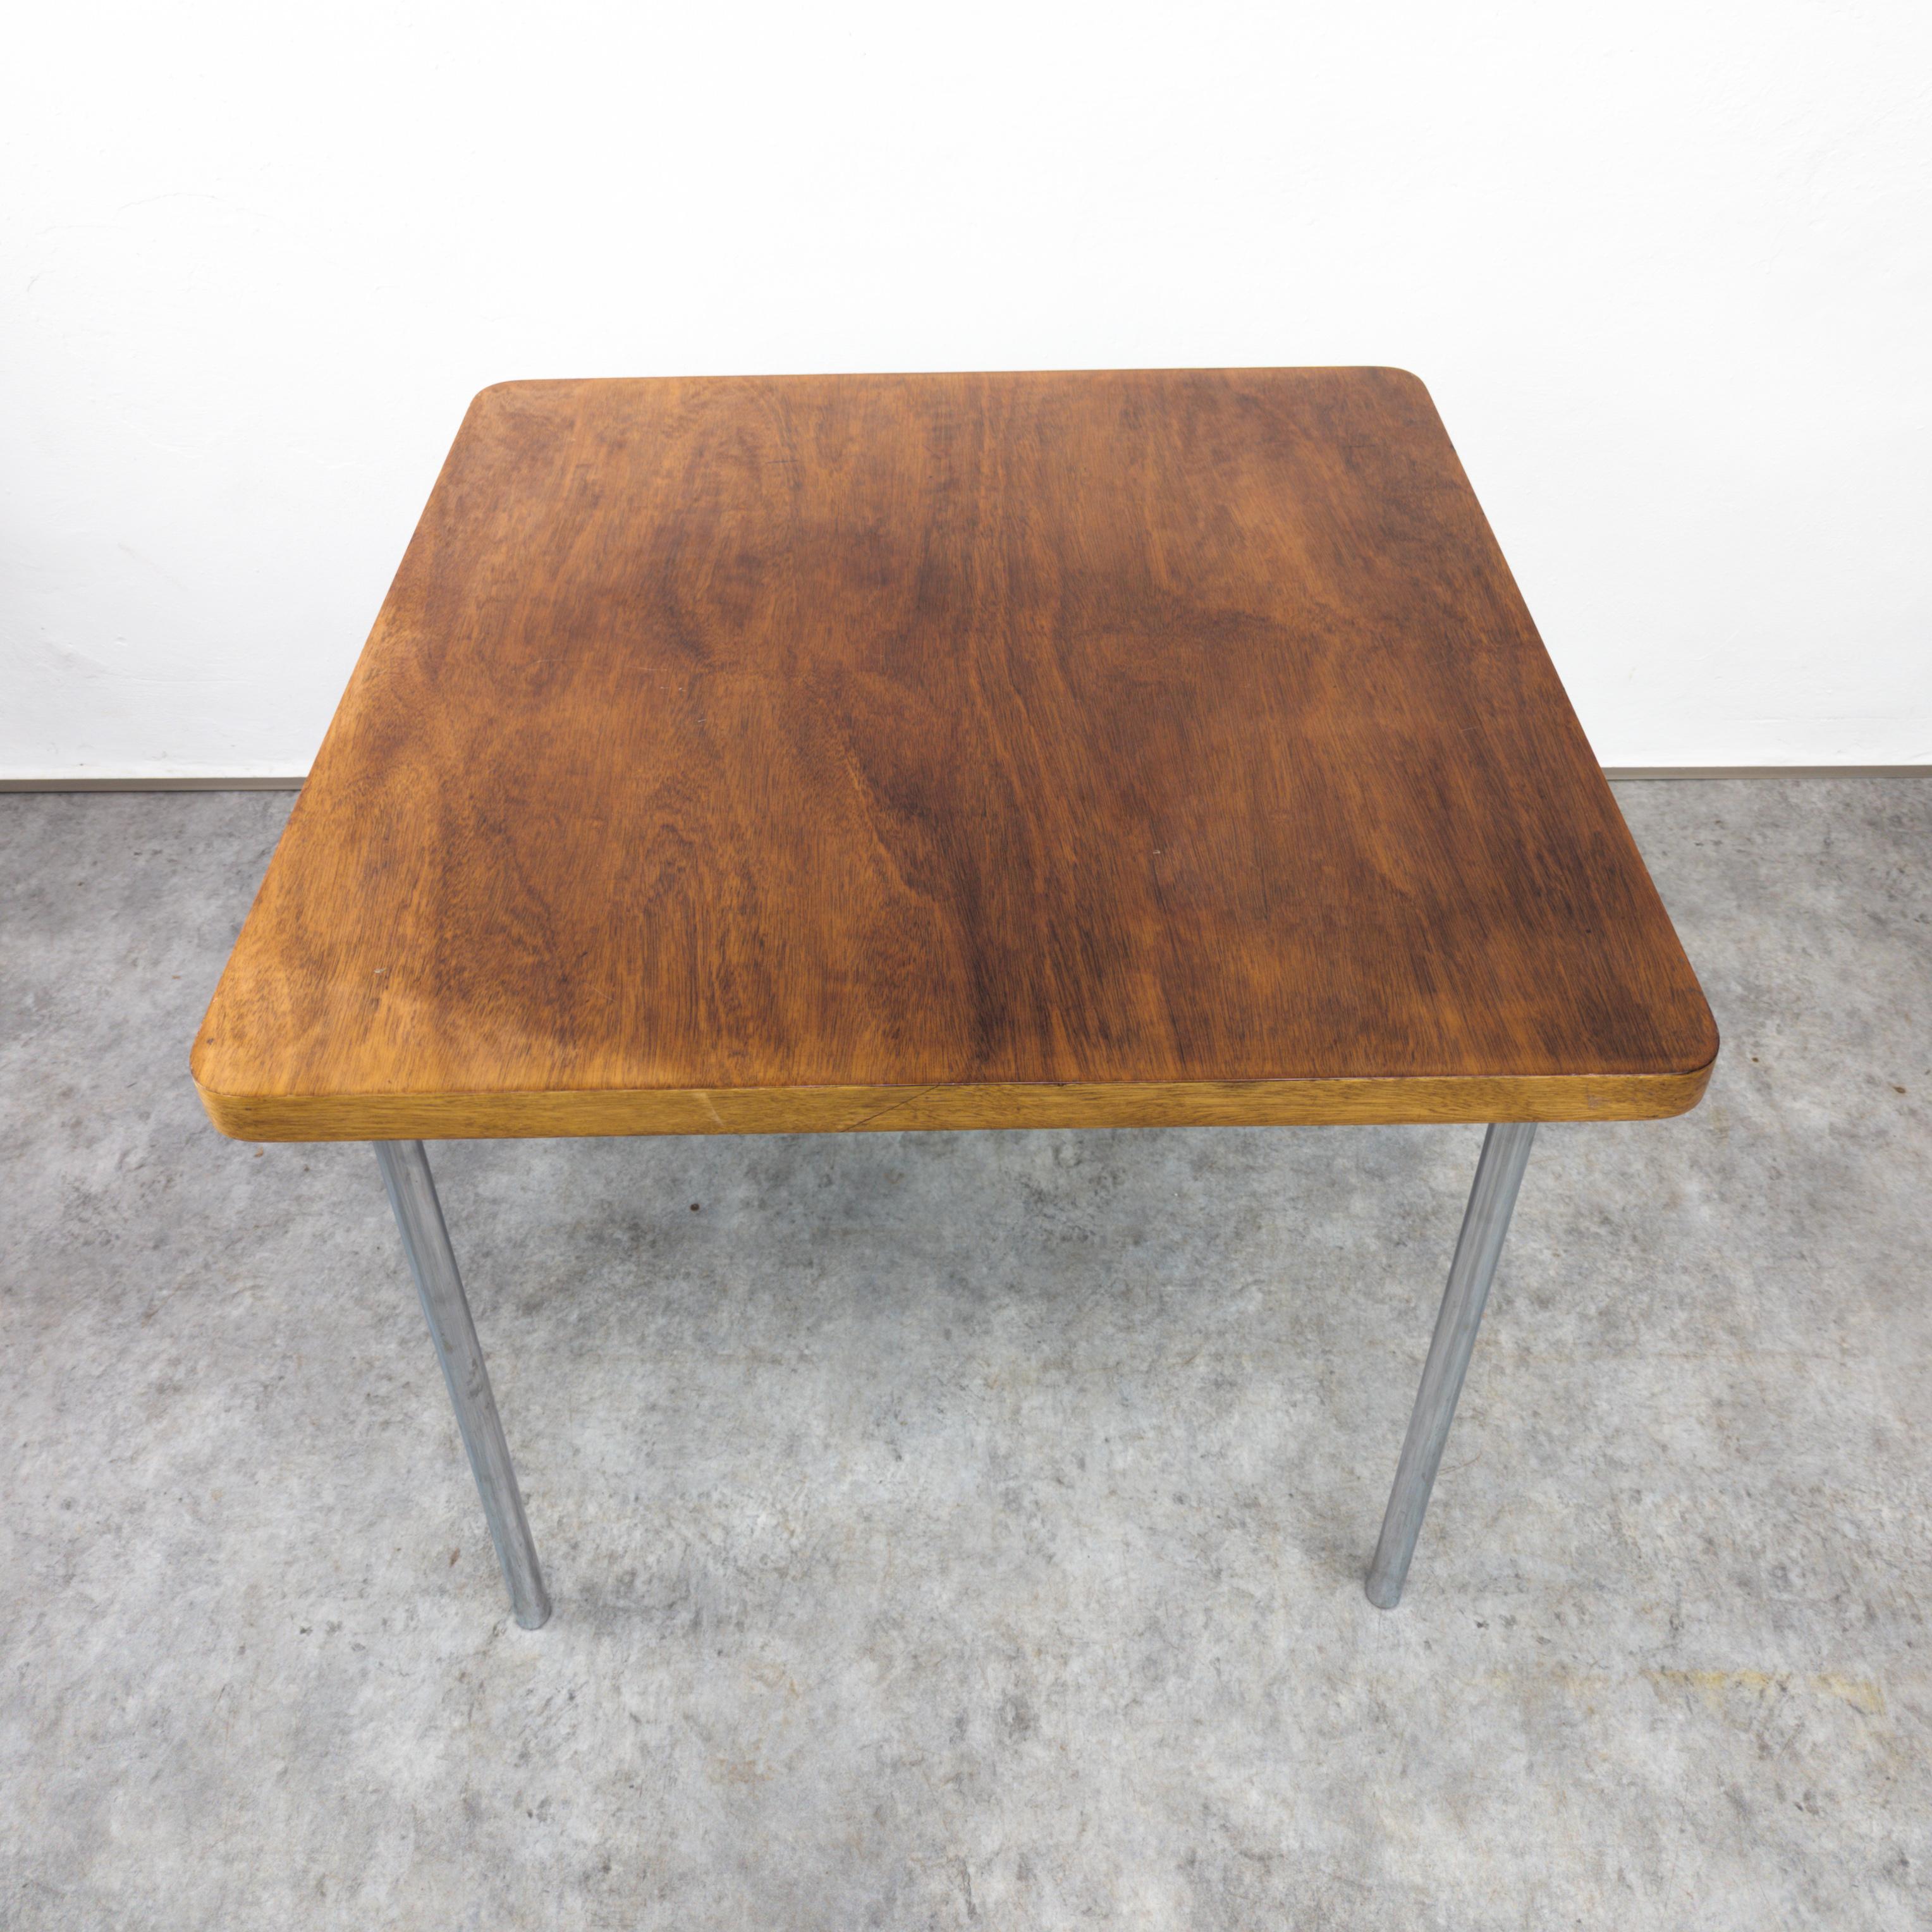 Rare Bauhaus dining table Thonet B 14 by Marcel Breuer  For Sale 1